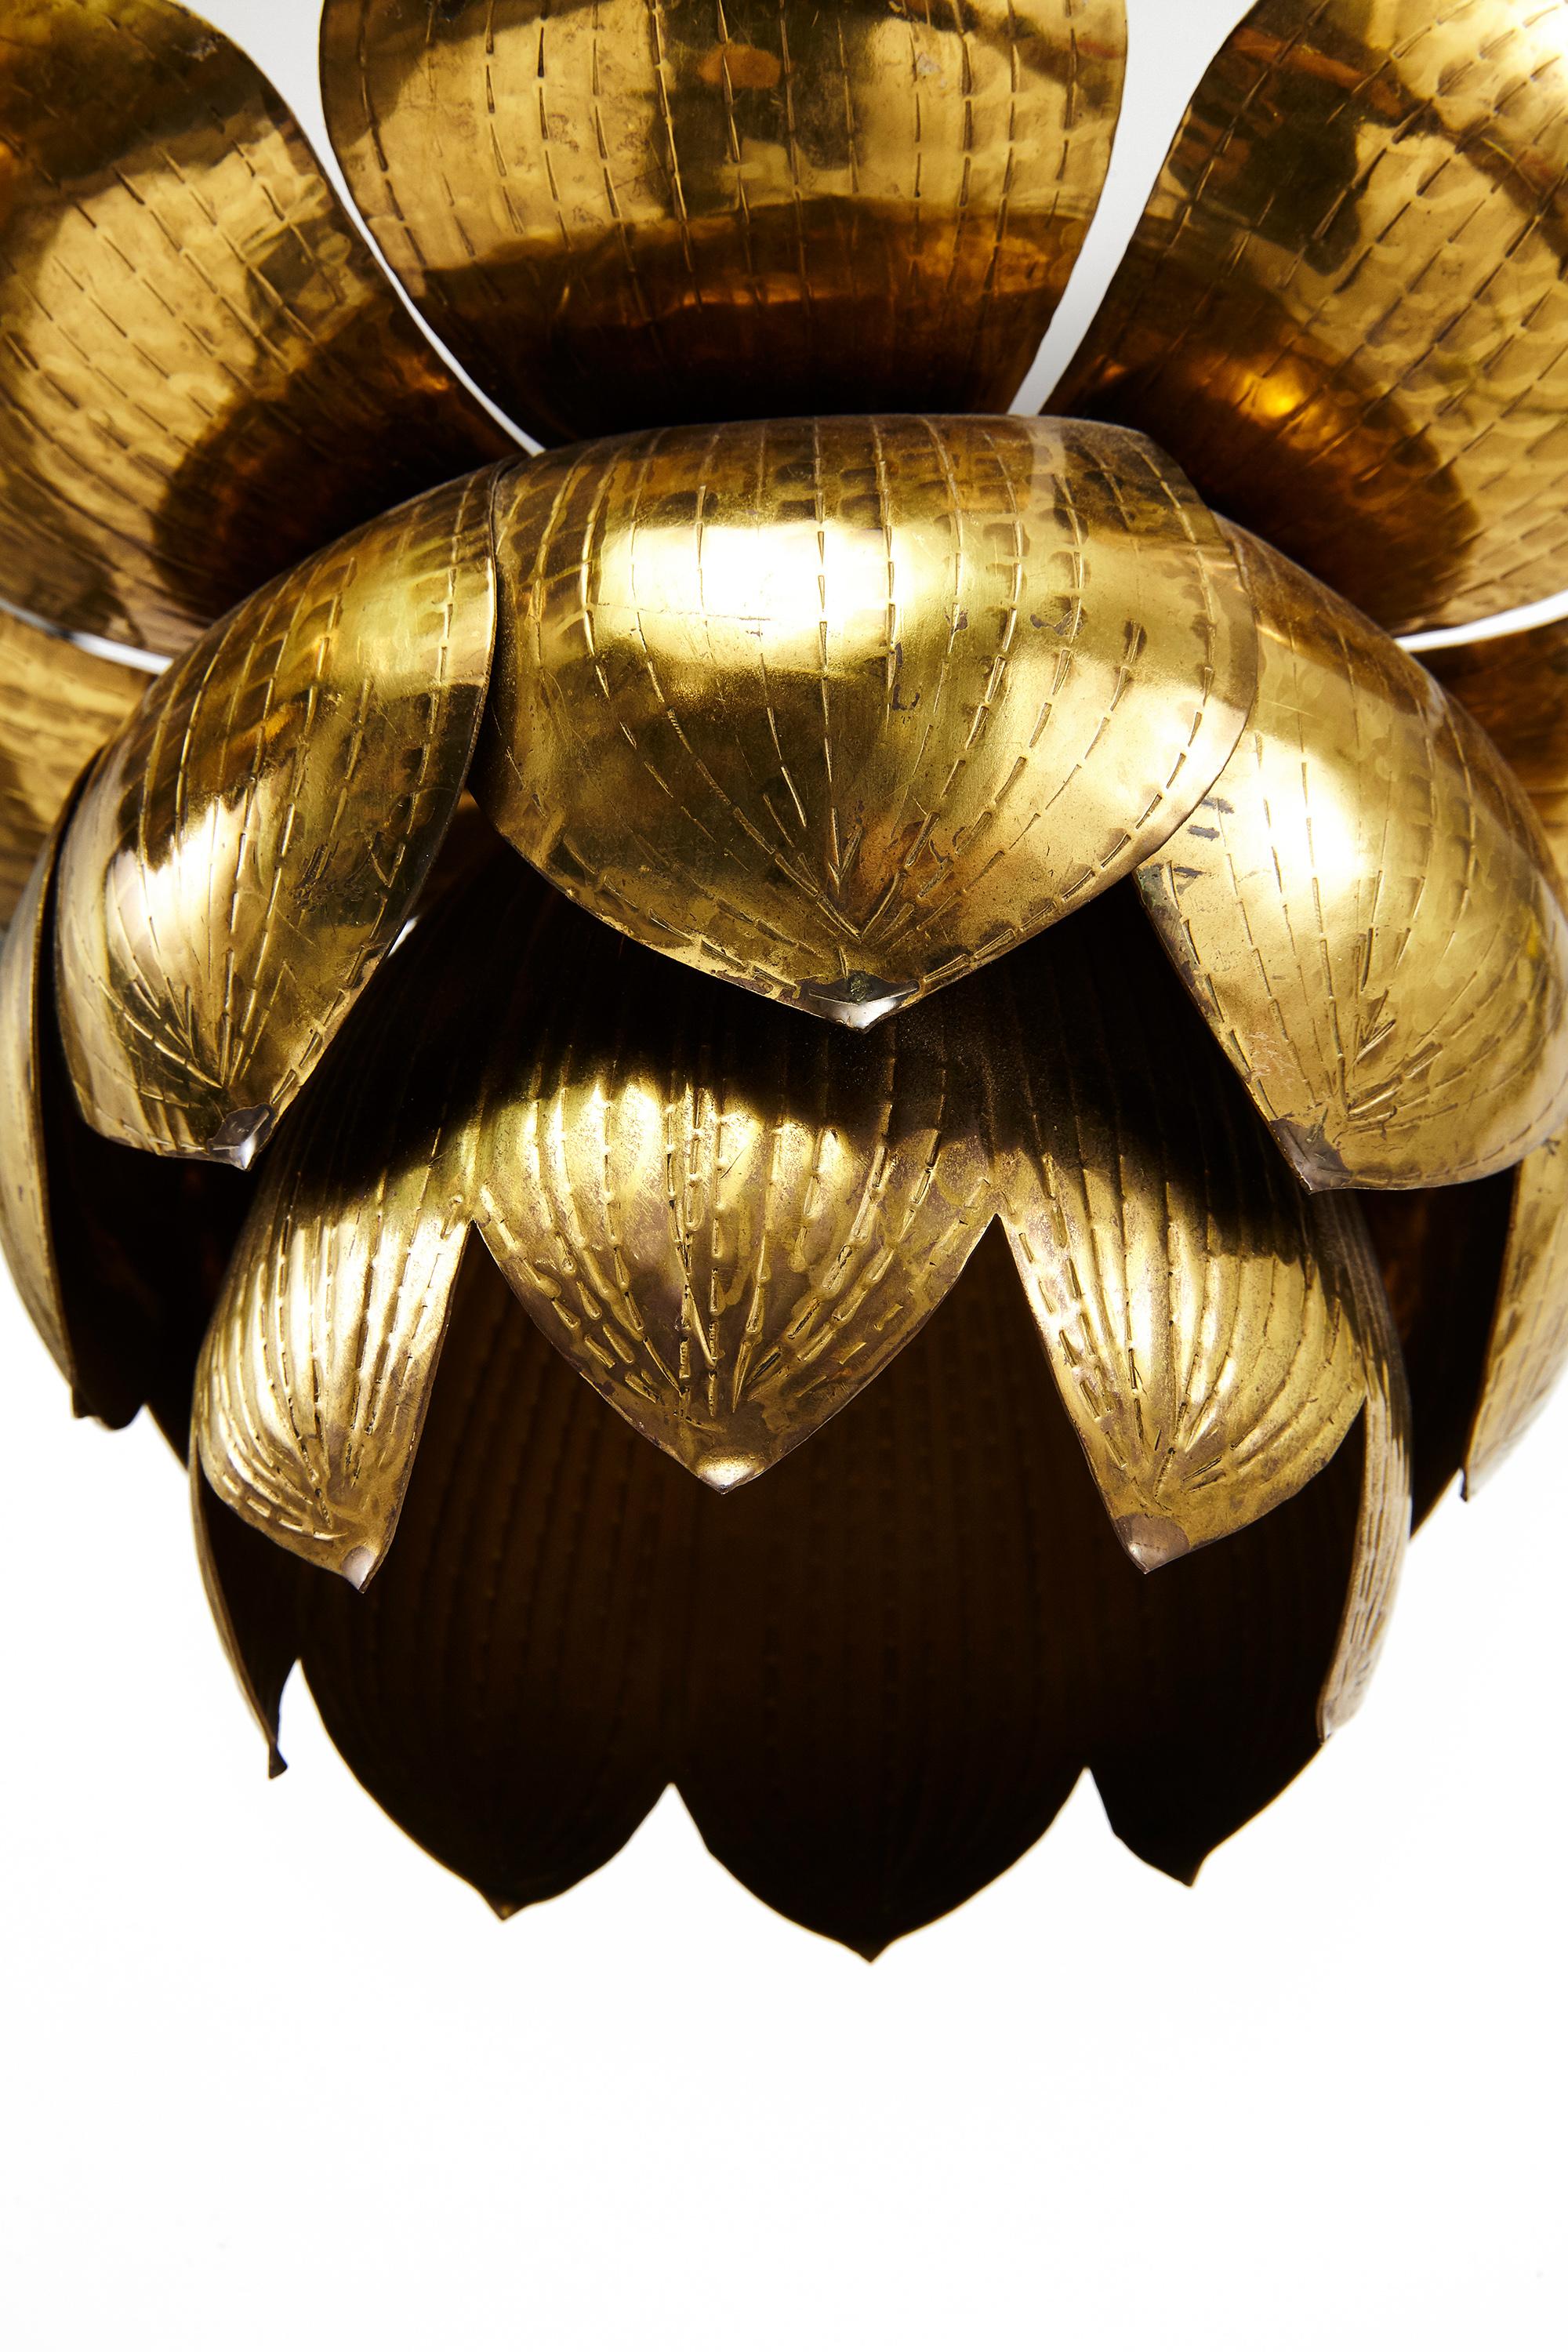 Stunning brass lotus pendant light fixtures by the Feldman Lighting Company, circa 1960. These highly glamorous Hollywood Regency style fixtures are in the organic shape of a lotus flower. Currently we have 6 available in this size as well as a pair